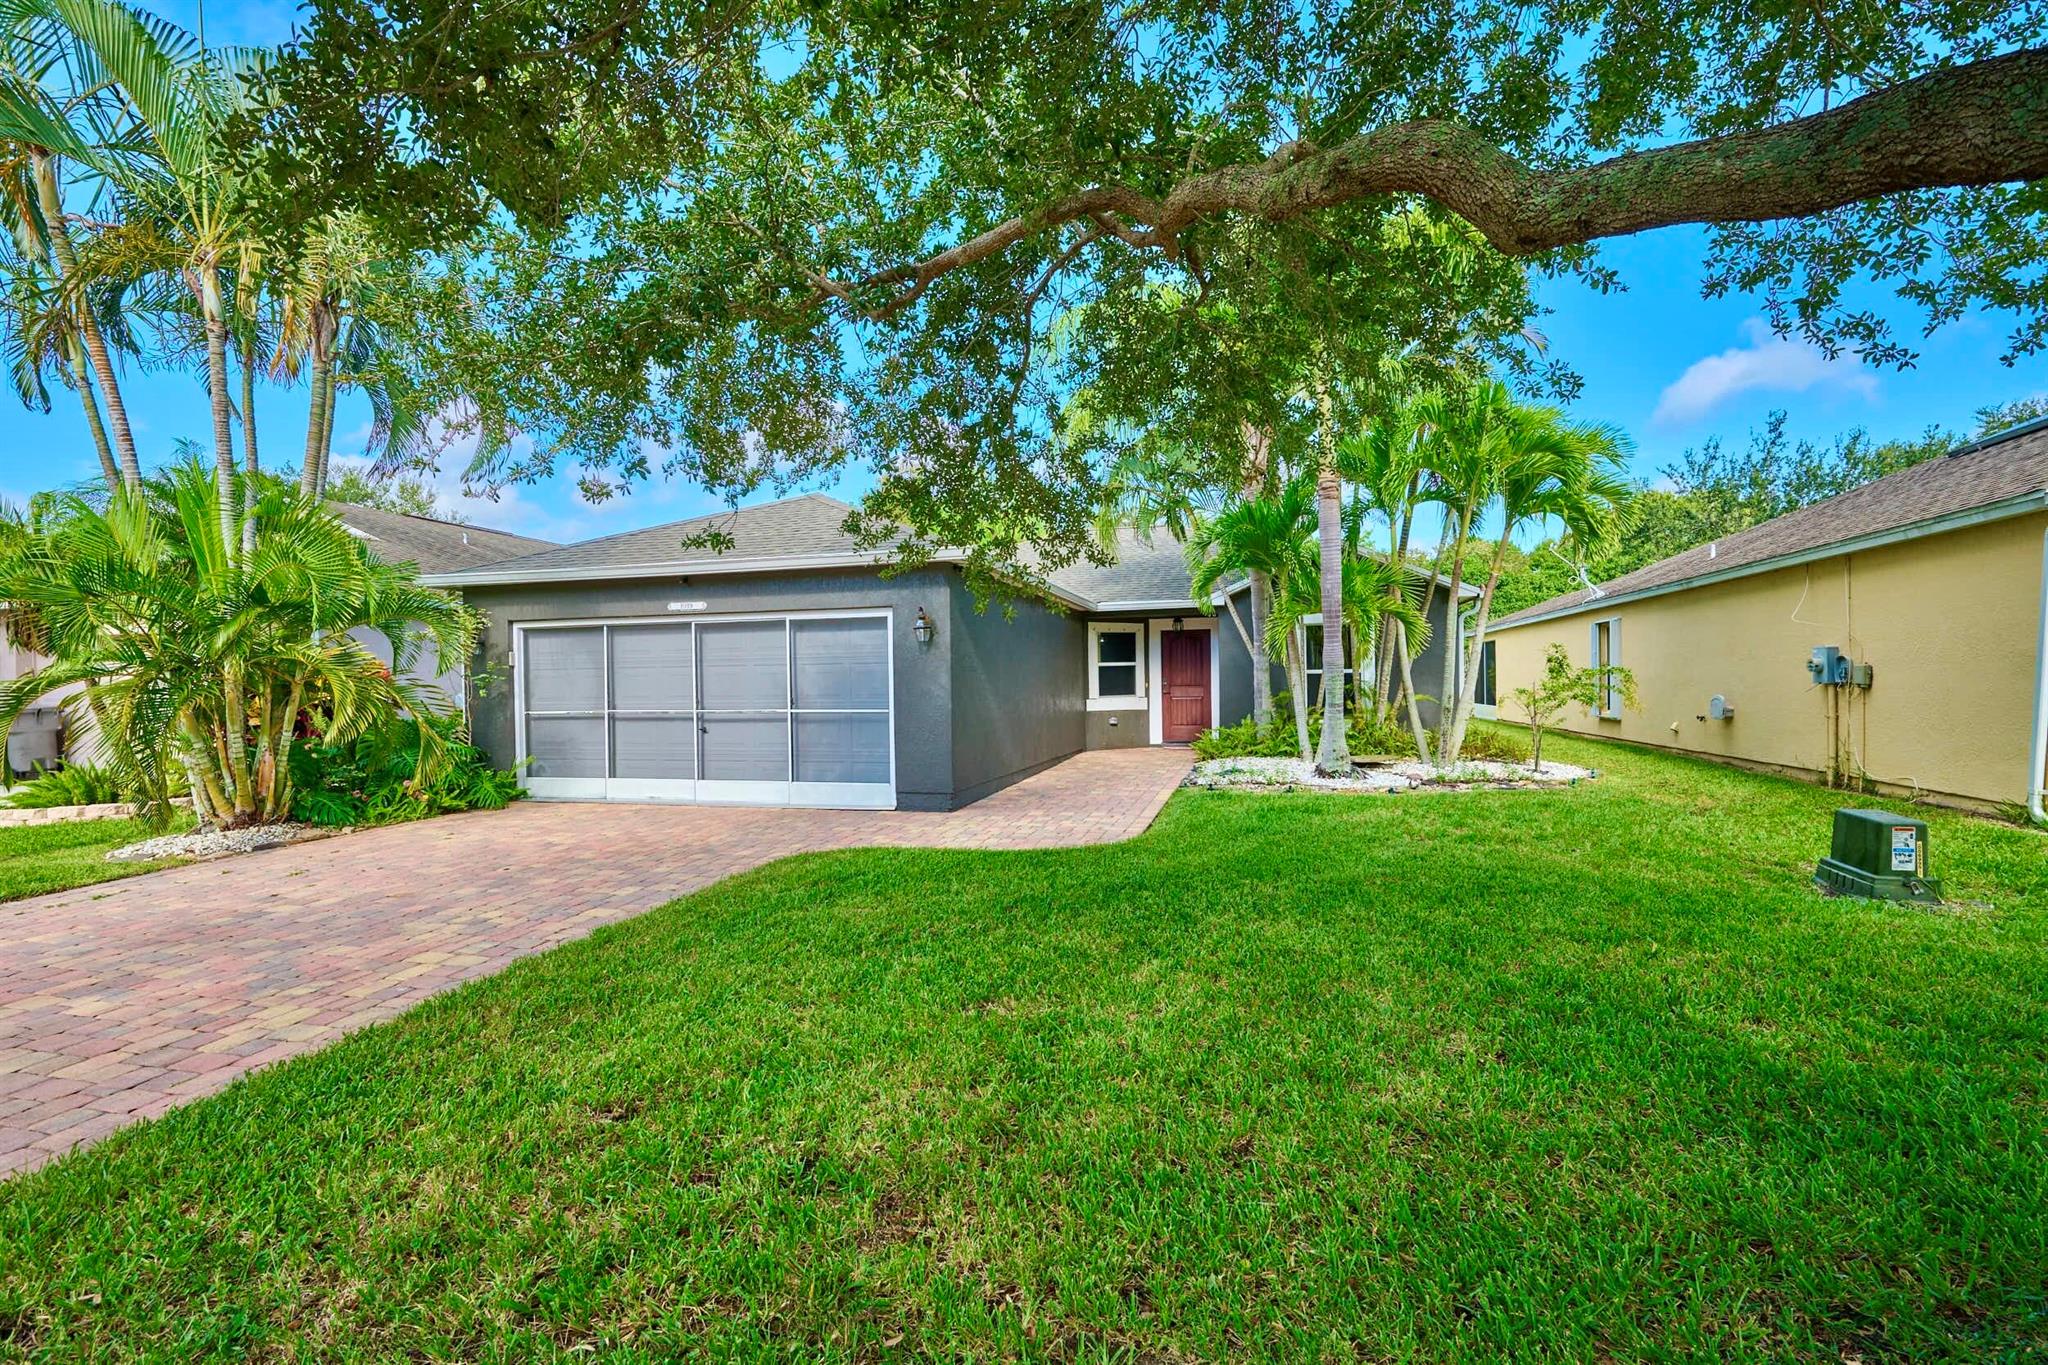 This beautifully updated 3/2/2 home can be yours to enjoy year-round or serve as your Florida Pied-a-Terre. Nestled in the desirable tree-lined neighborhood of Waterford Lakes. Upgrades include: 2024: 5'' base molding and new RICH SLATE TILE FLOORING throughout including Lanai and out to Zgarden. 2022: d/w, microwave, 2018: ROOF and KITCHEN! 2017 w/d, 2016 whtr, 2015 HVAC. Home features open floor plan, cathedral ceilings, large owners suite w/ensuite bathrm and large walk-in closet, plus split bedrooms. EXT: 2015 Pavered driveway, walkway. Two-car garage complete w/Tinker Screen and plug for generator. Barn Doors open out to bright Zen garden views w/white privacy fence. Community features sidewalks, pool and playground. Landscaping is included in low monthly HOA. MUST SEE VIDEO TOUR!!